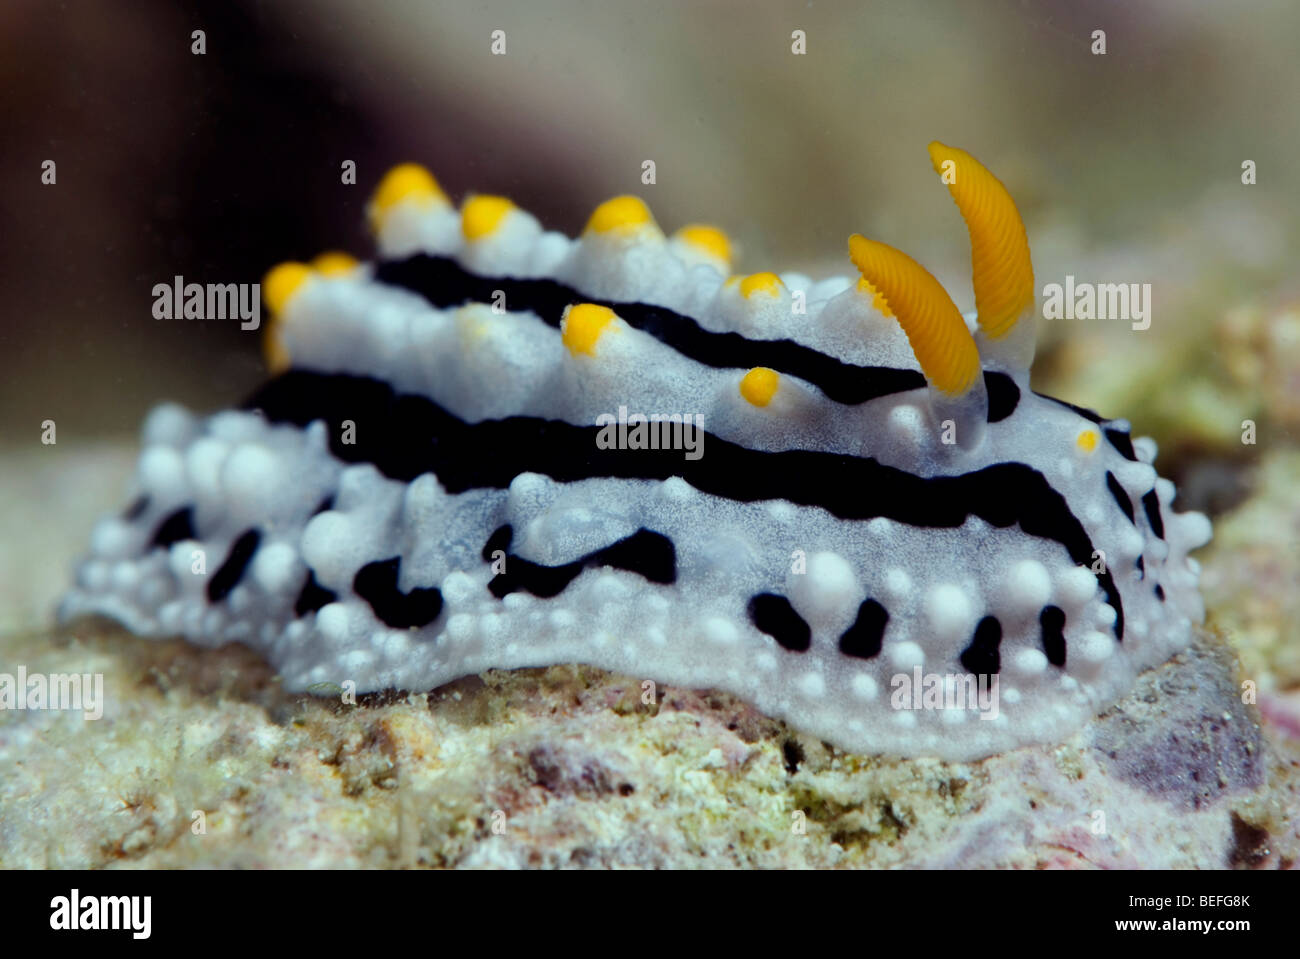 Black Nudibranch with grey elevated lines and yellow warts under water. Stock Photo